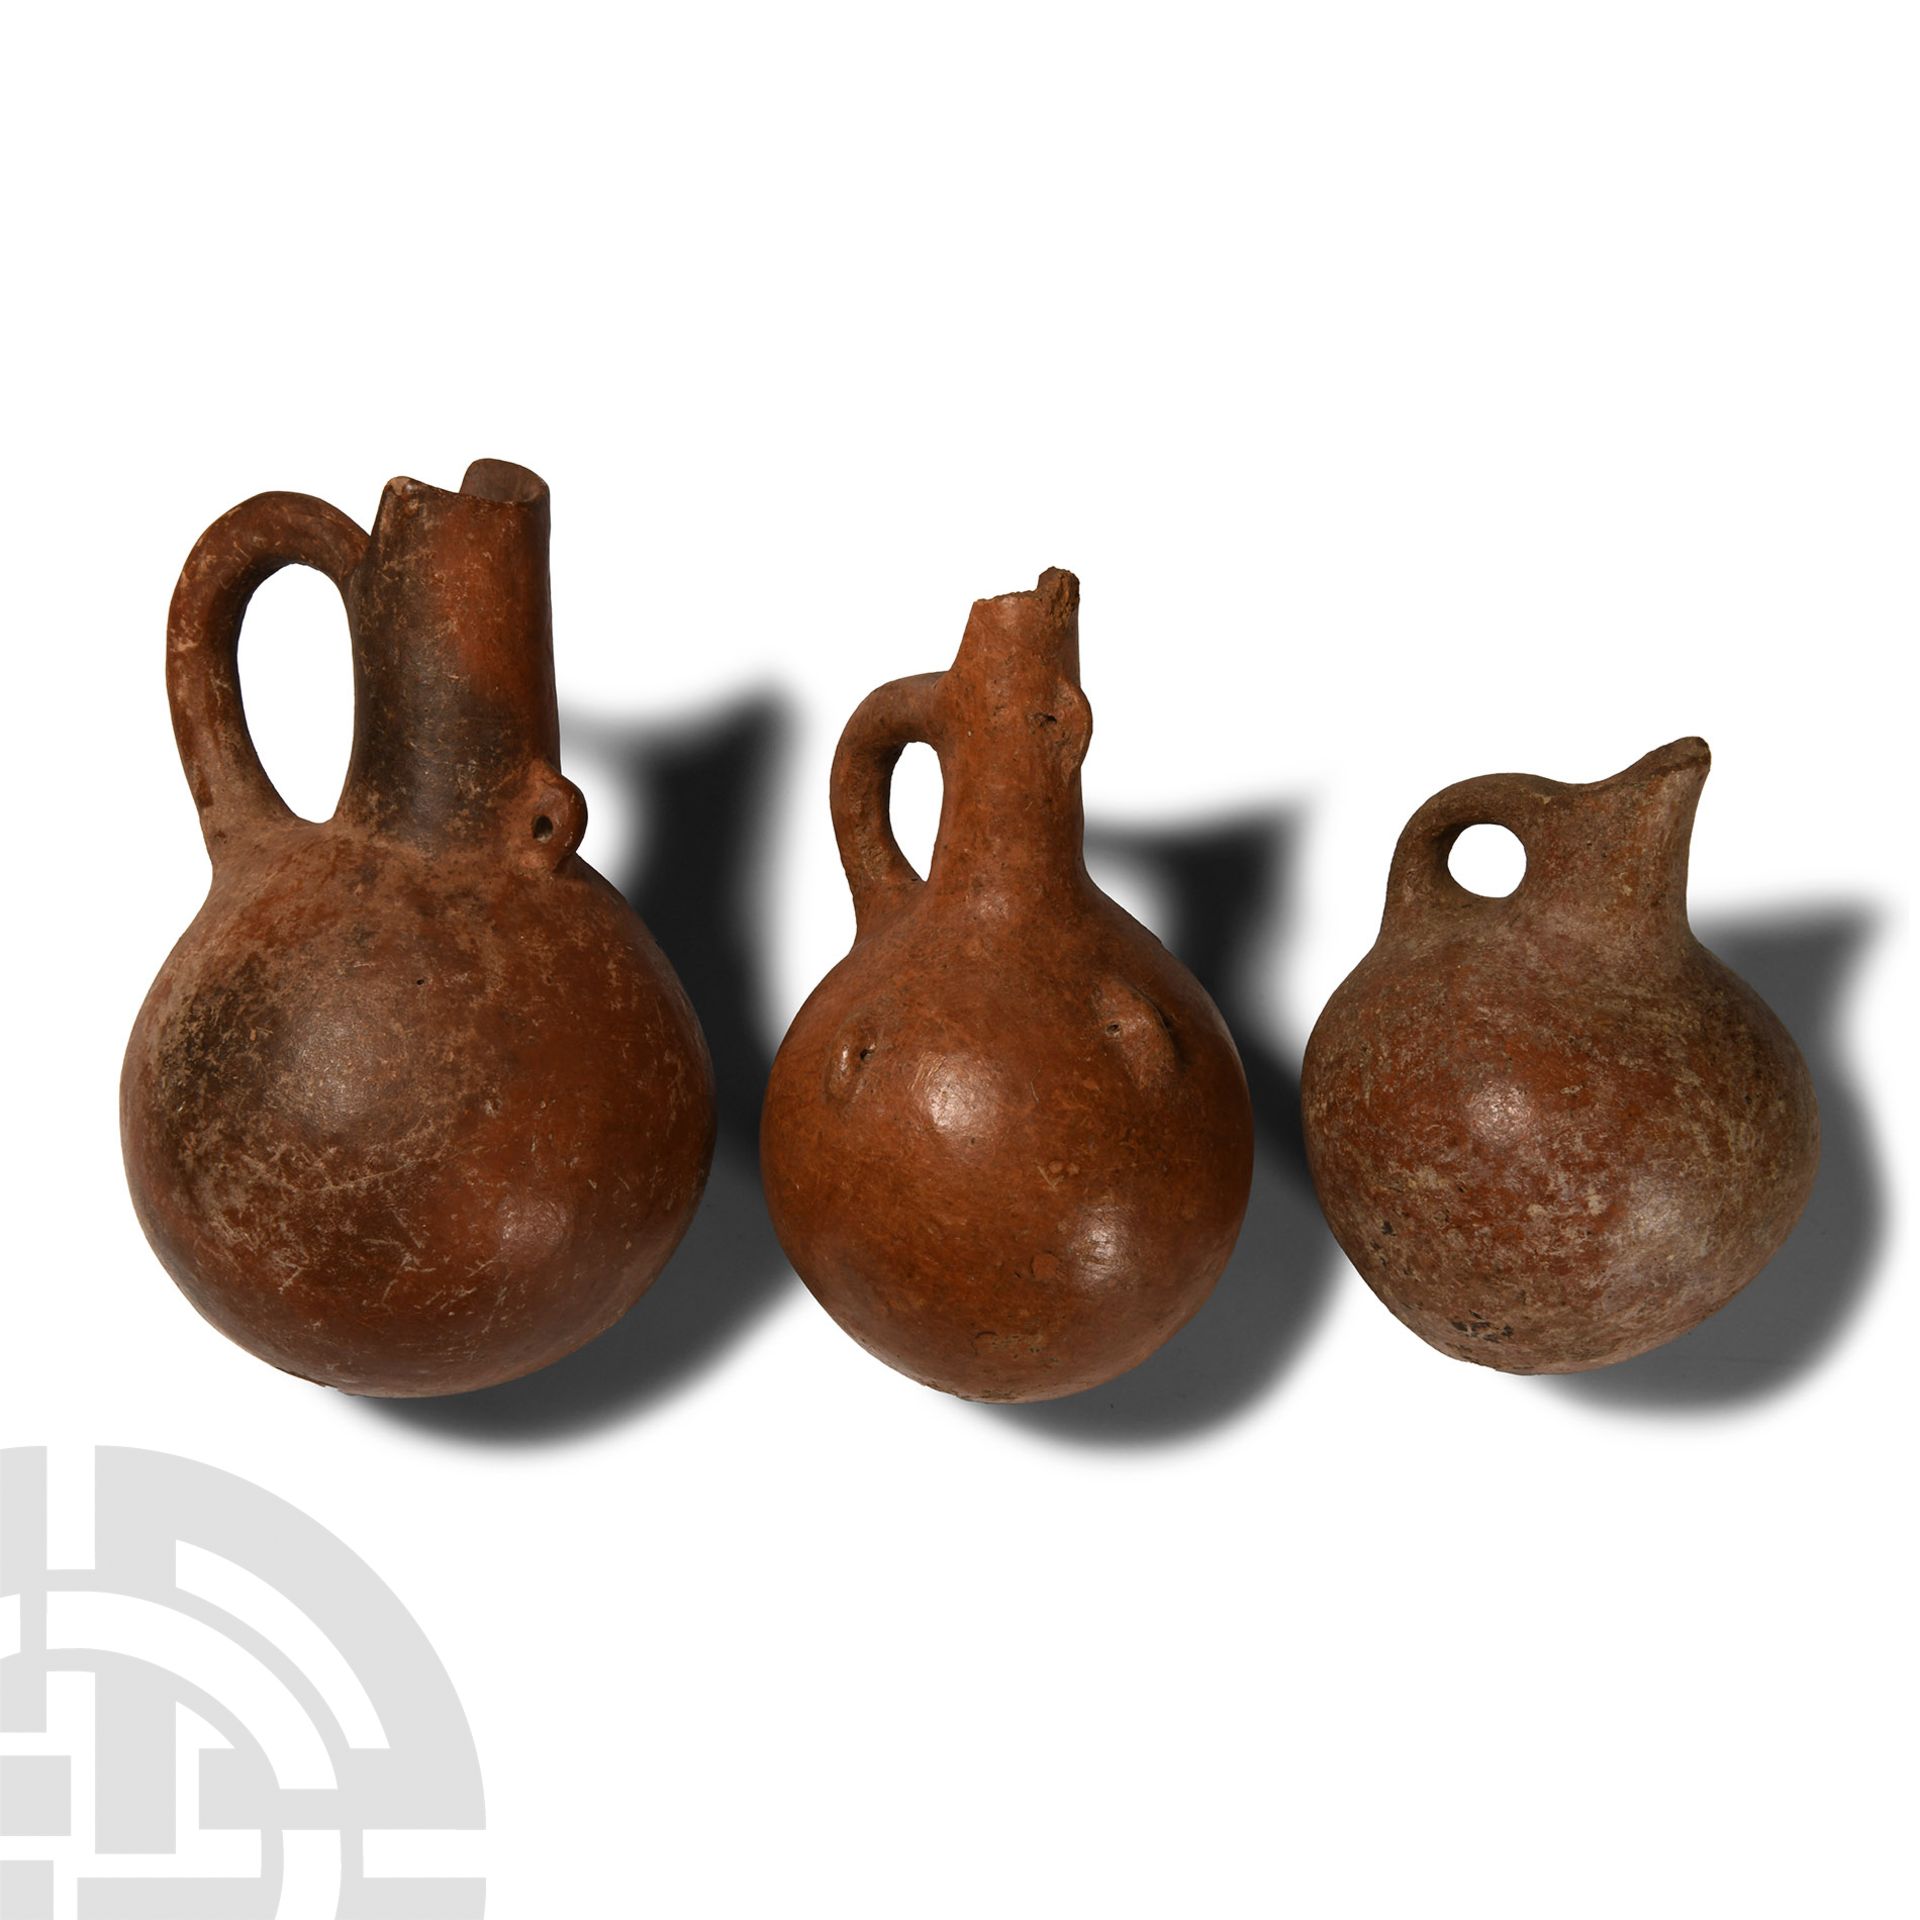 Cypro-Archaic Red Polished Ware Zoomorphic Jug Group